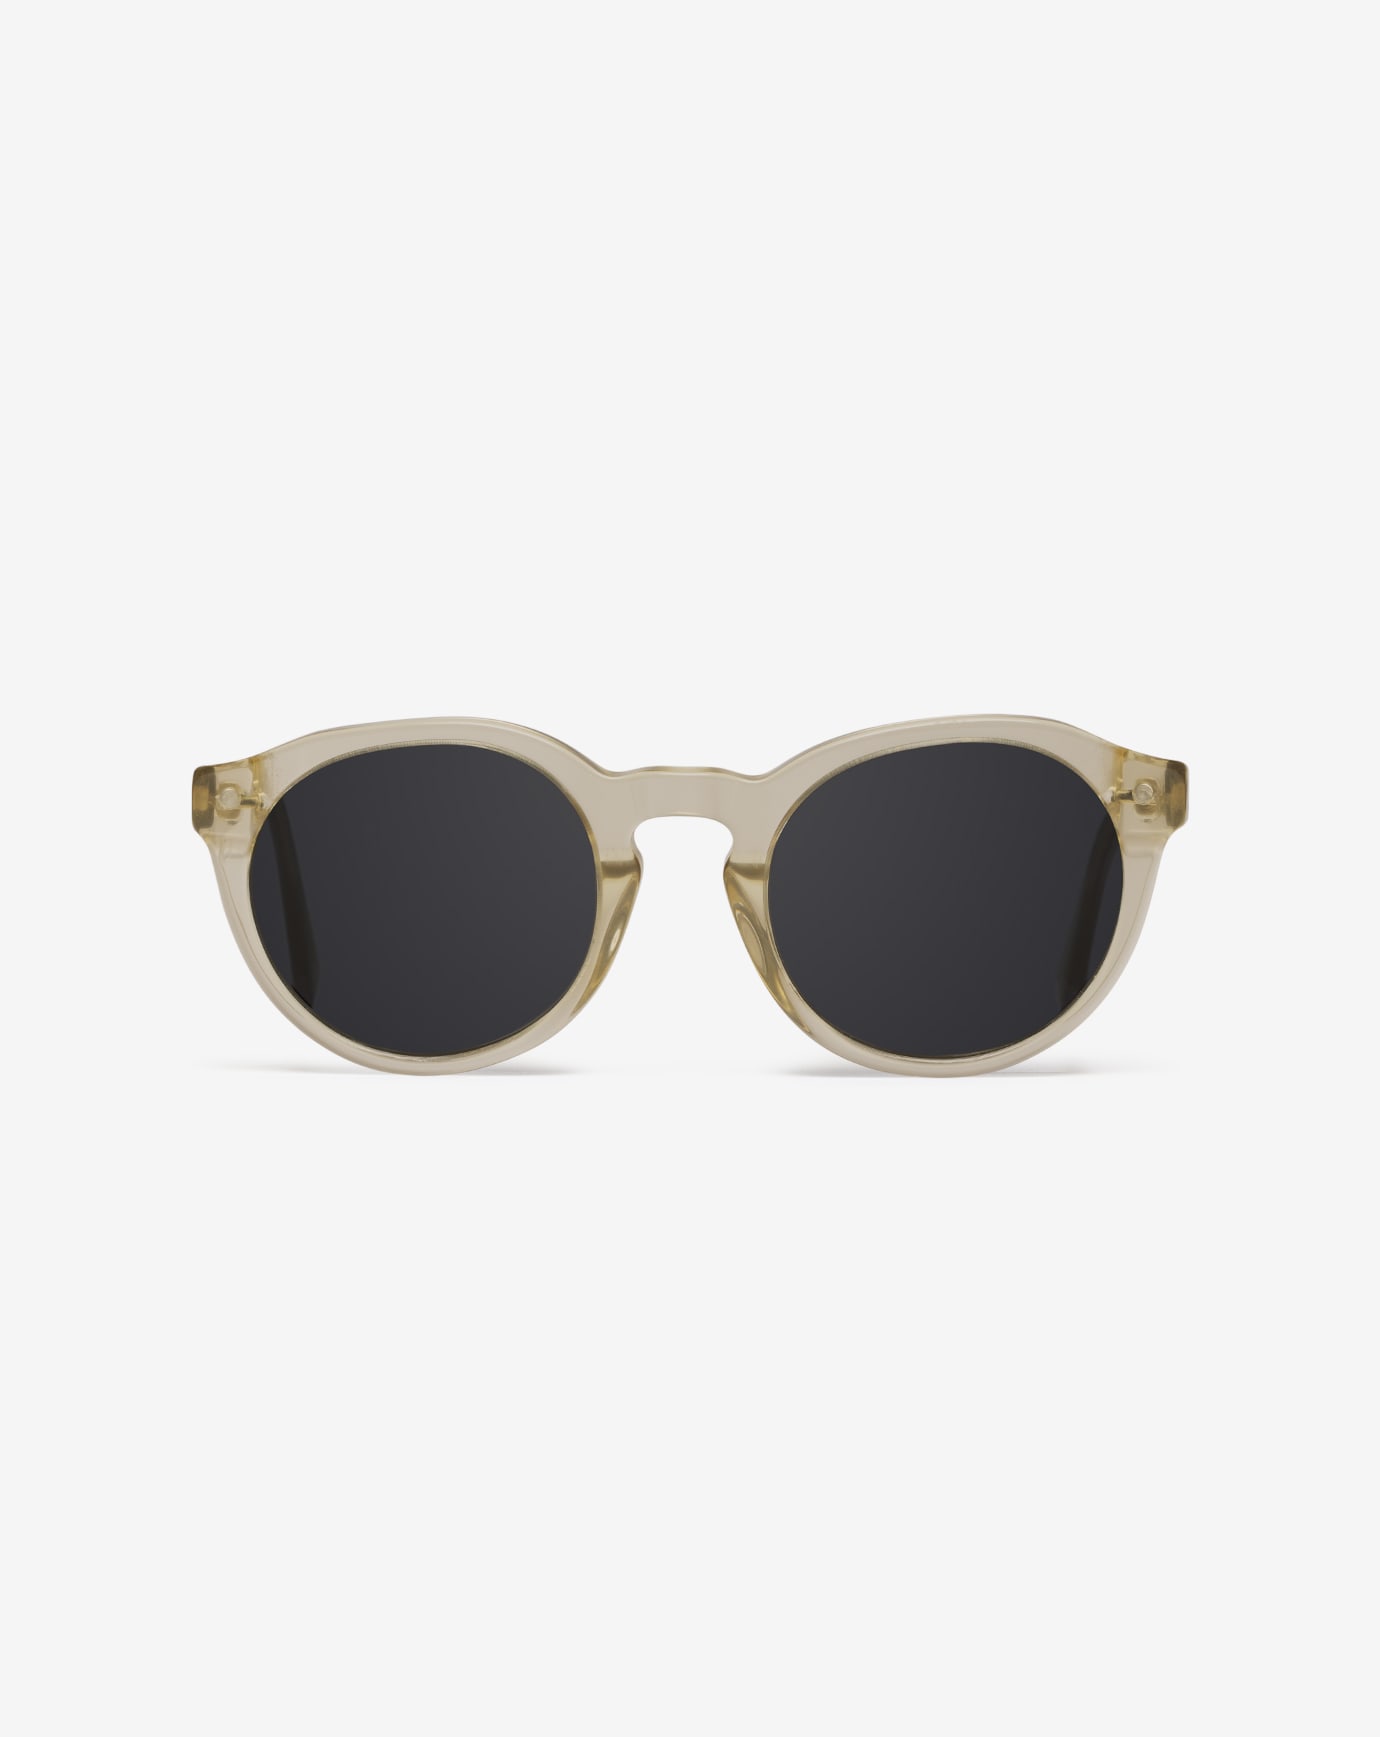 Related Product - BANDON SUNGLASSES